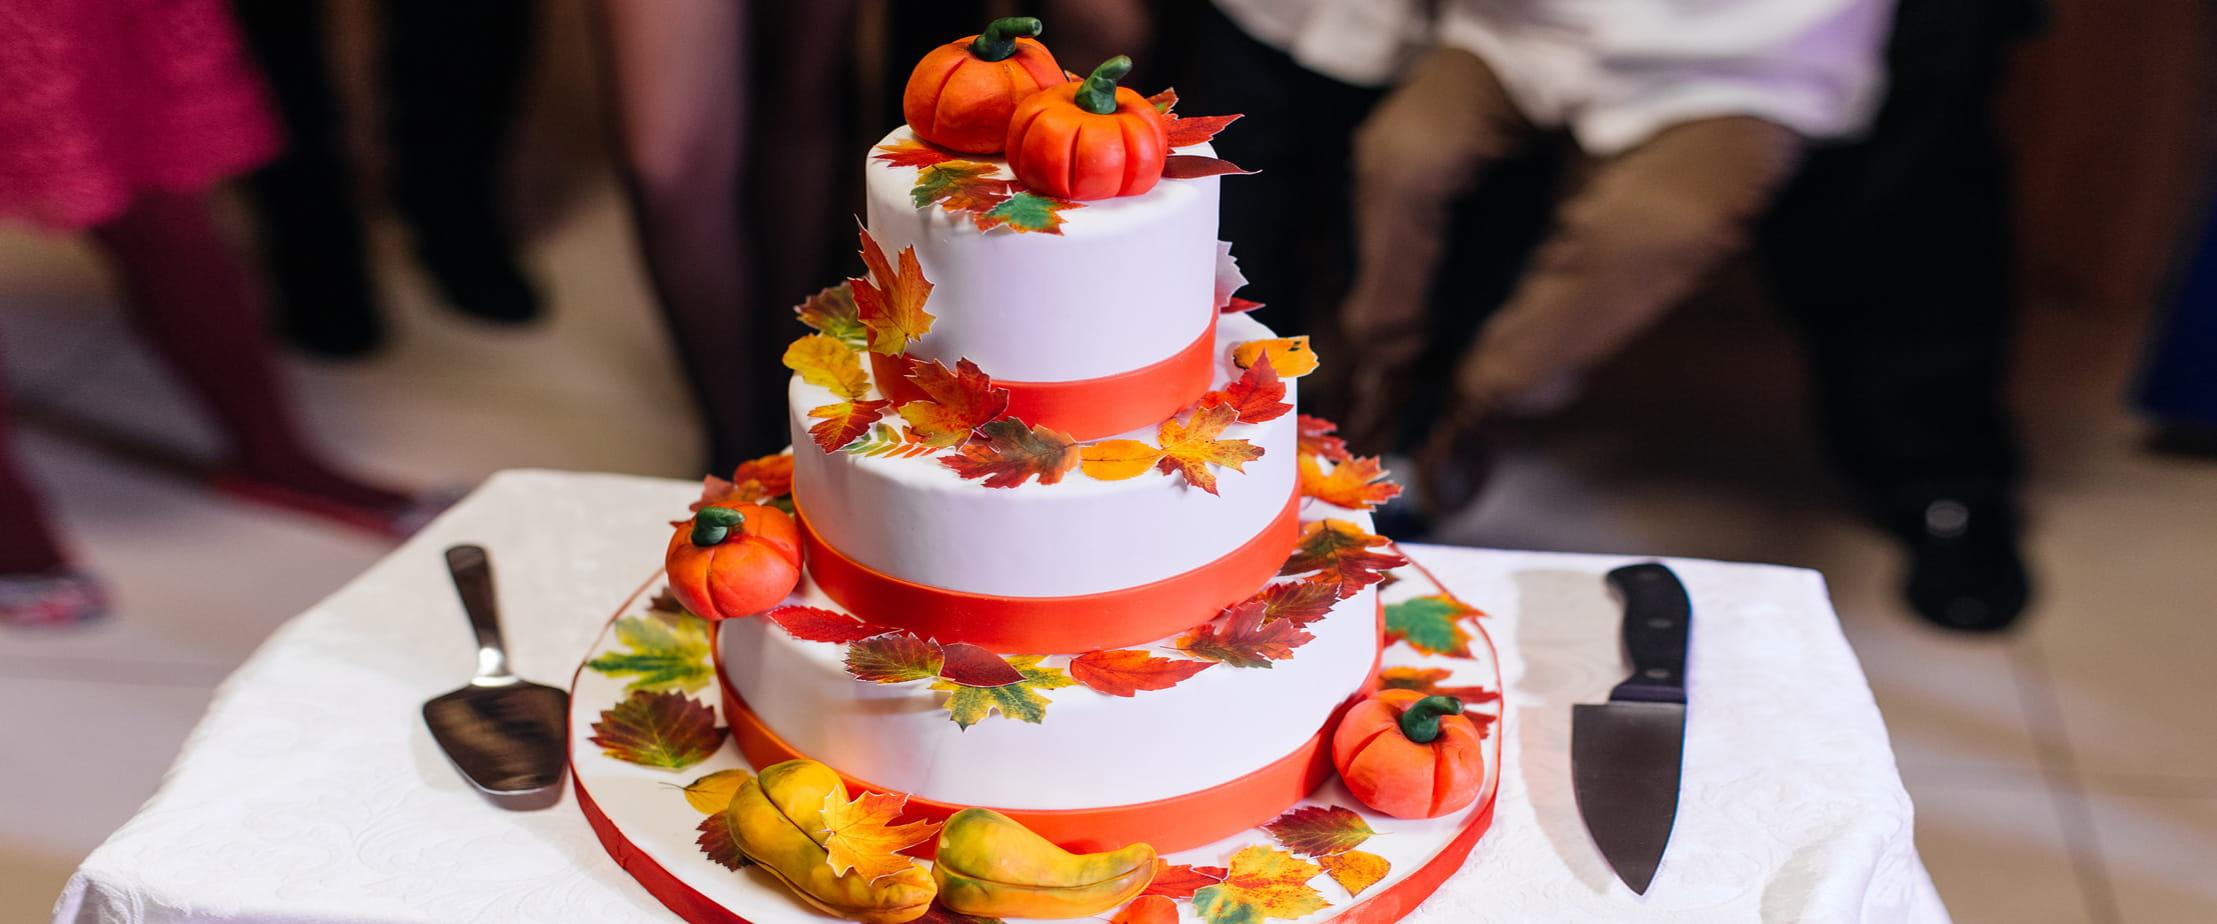 Fall Wedding Cakes That WOW 30+ Best Ideas